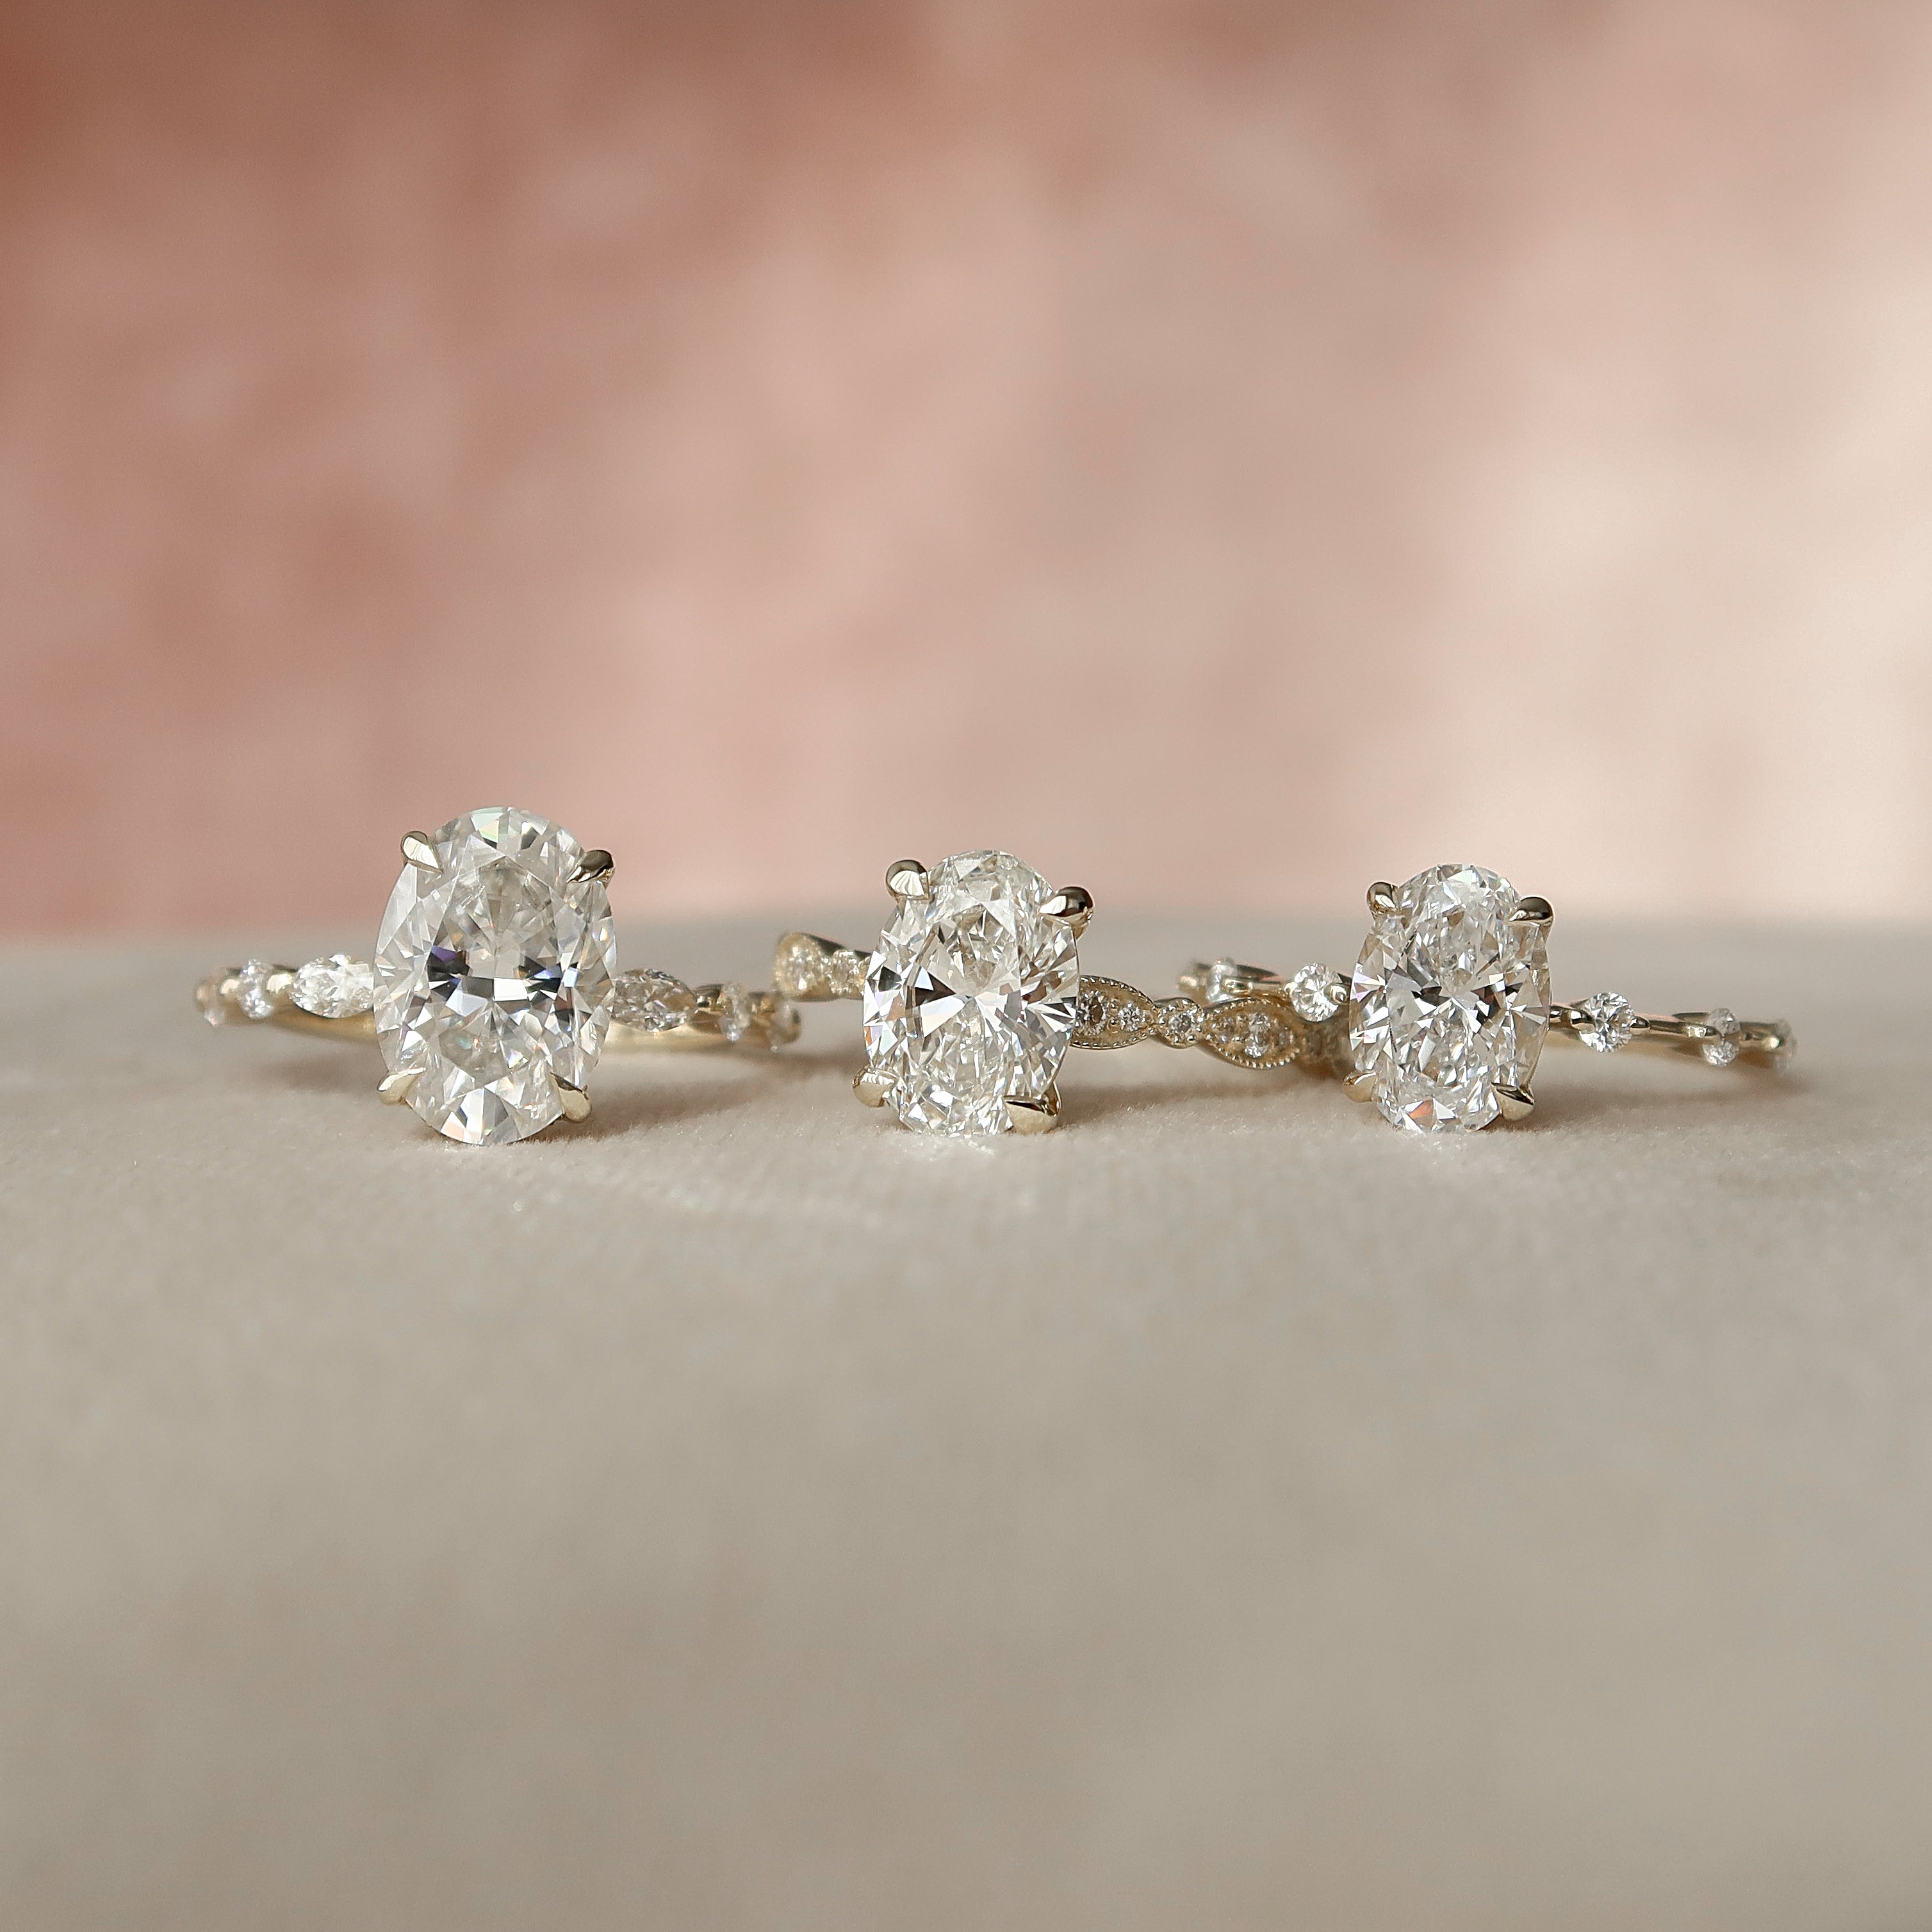 Why Oval Engagement Rings are the New Classic?